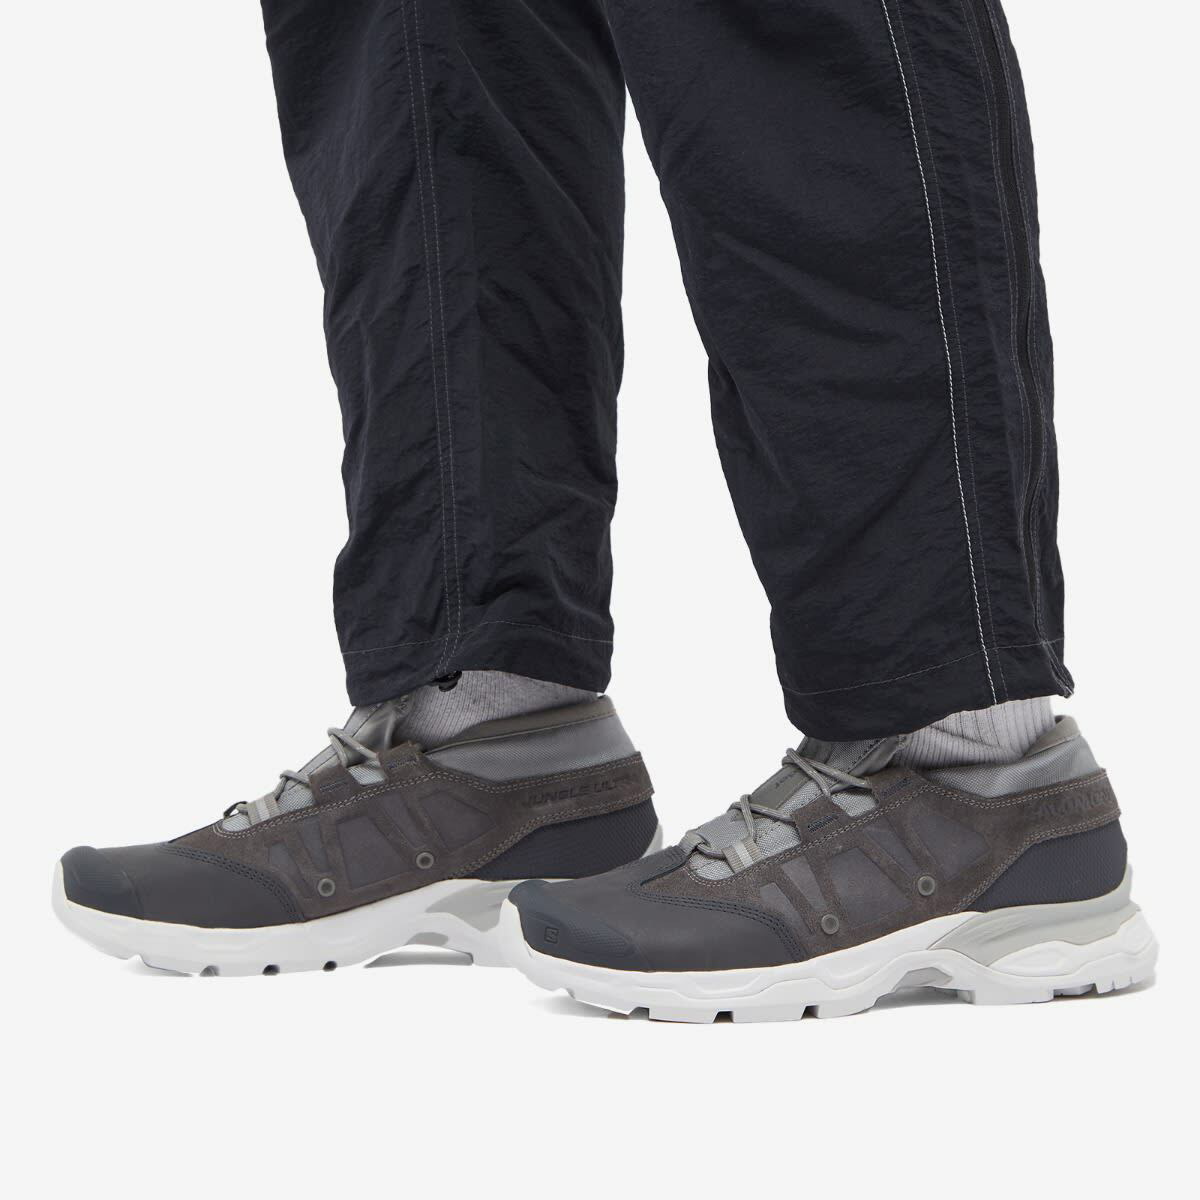 And Wander x Salomon Jungle Ultra Low Sneakers in Grey and Wander